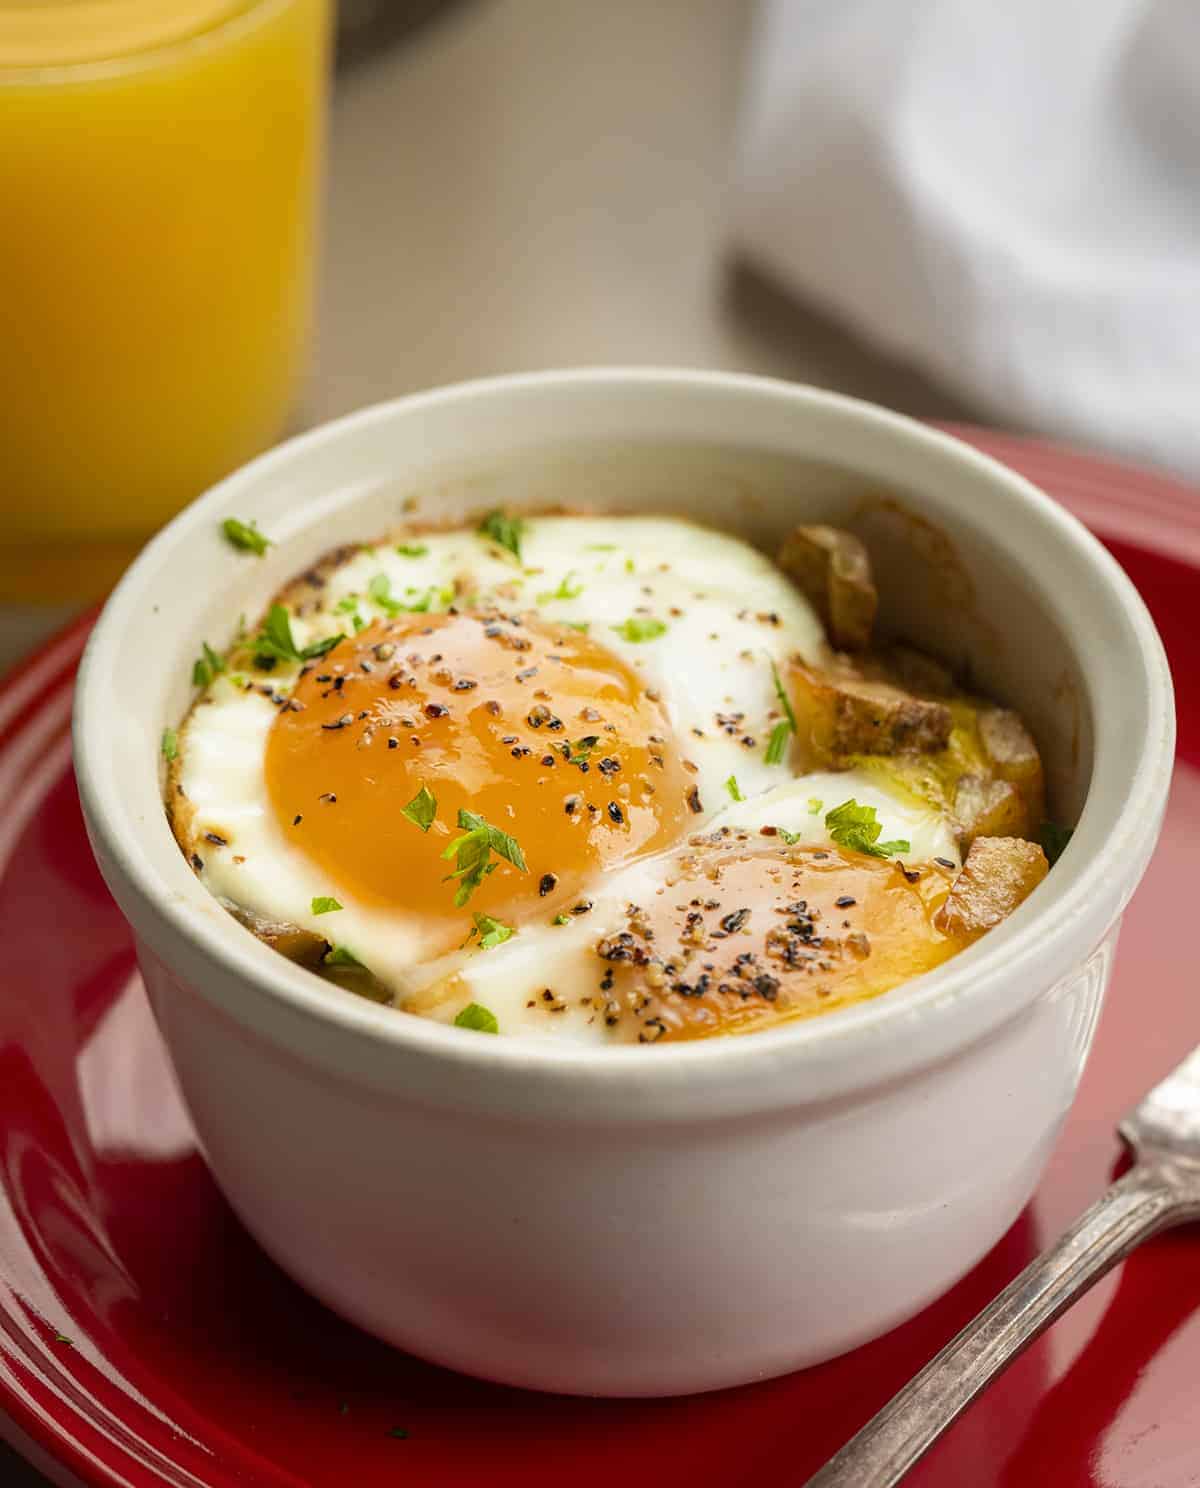 Baked Eggs- Eggs in a Cup - Shirred Eggs - Snug Eggs in a Cup on a Red Plate